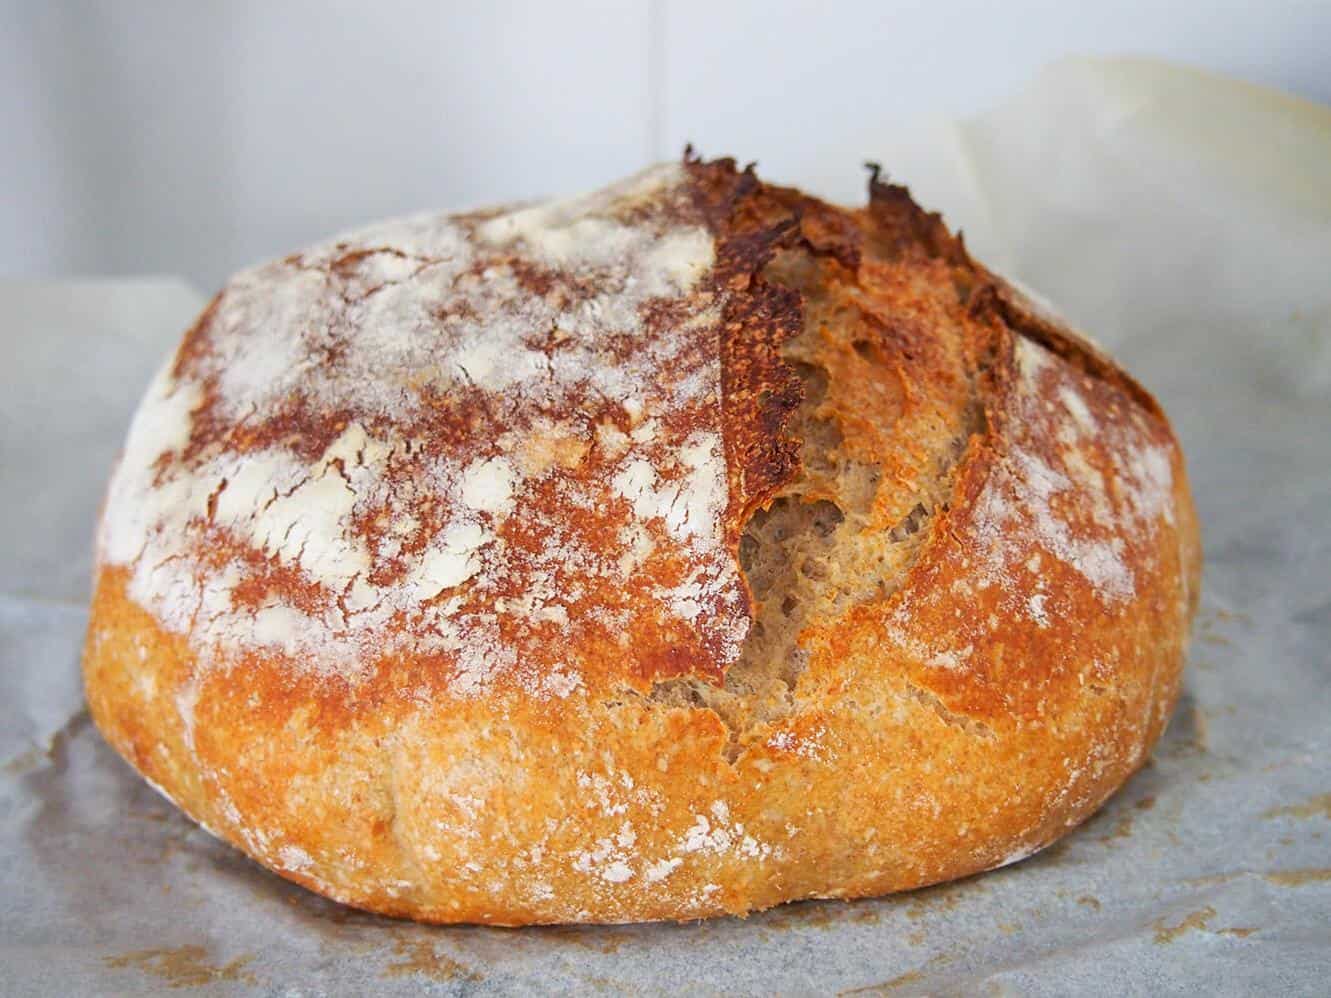  The texture of the bread is light and airy, with a firm and satisfying crust.